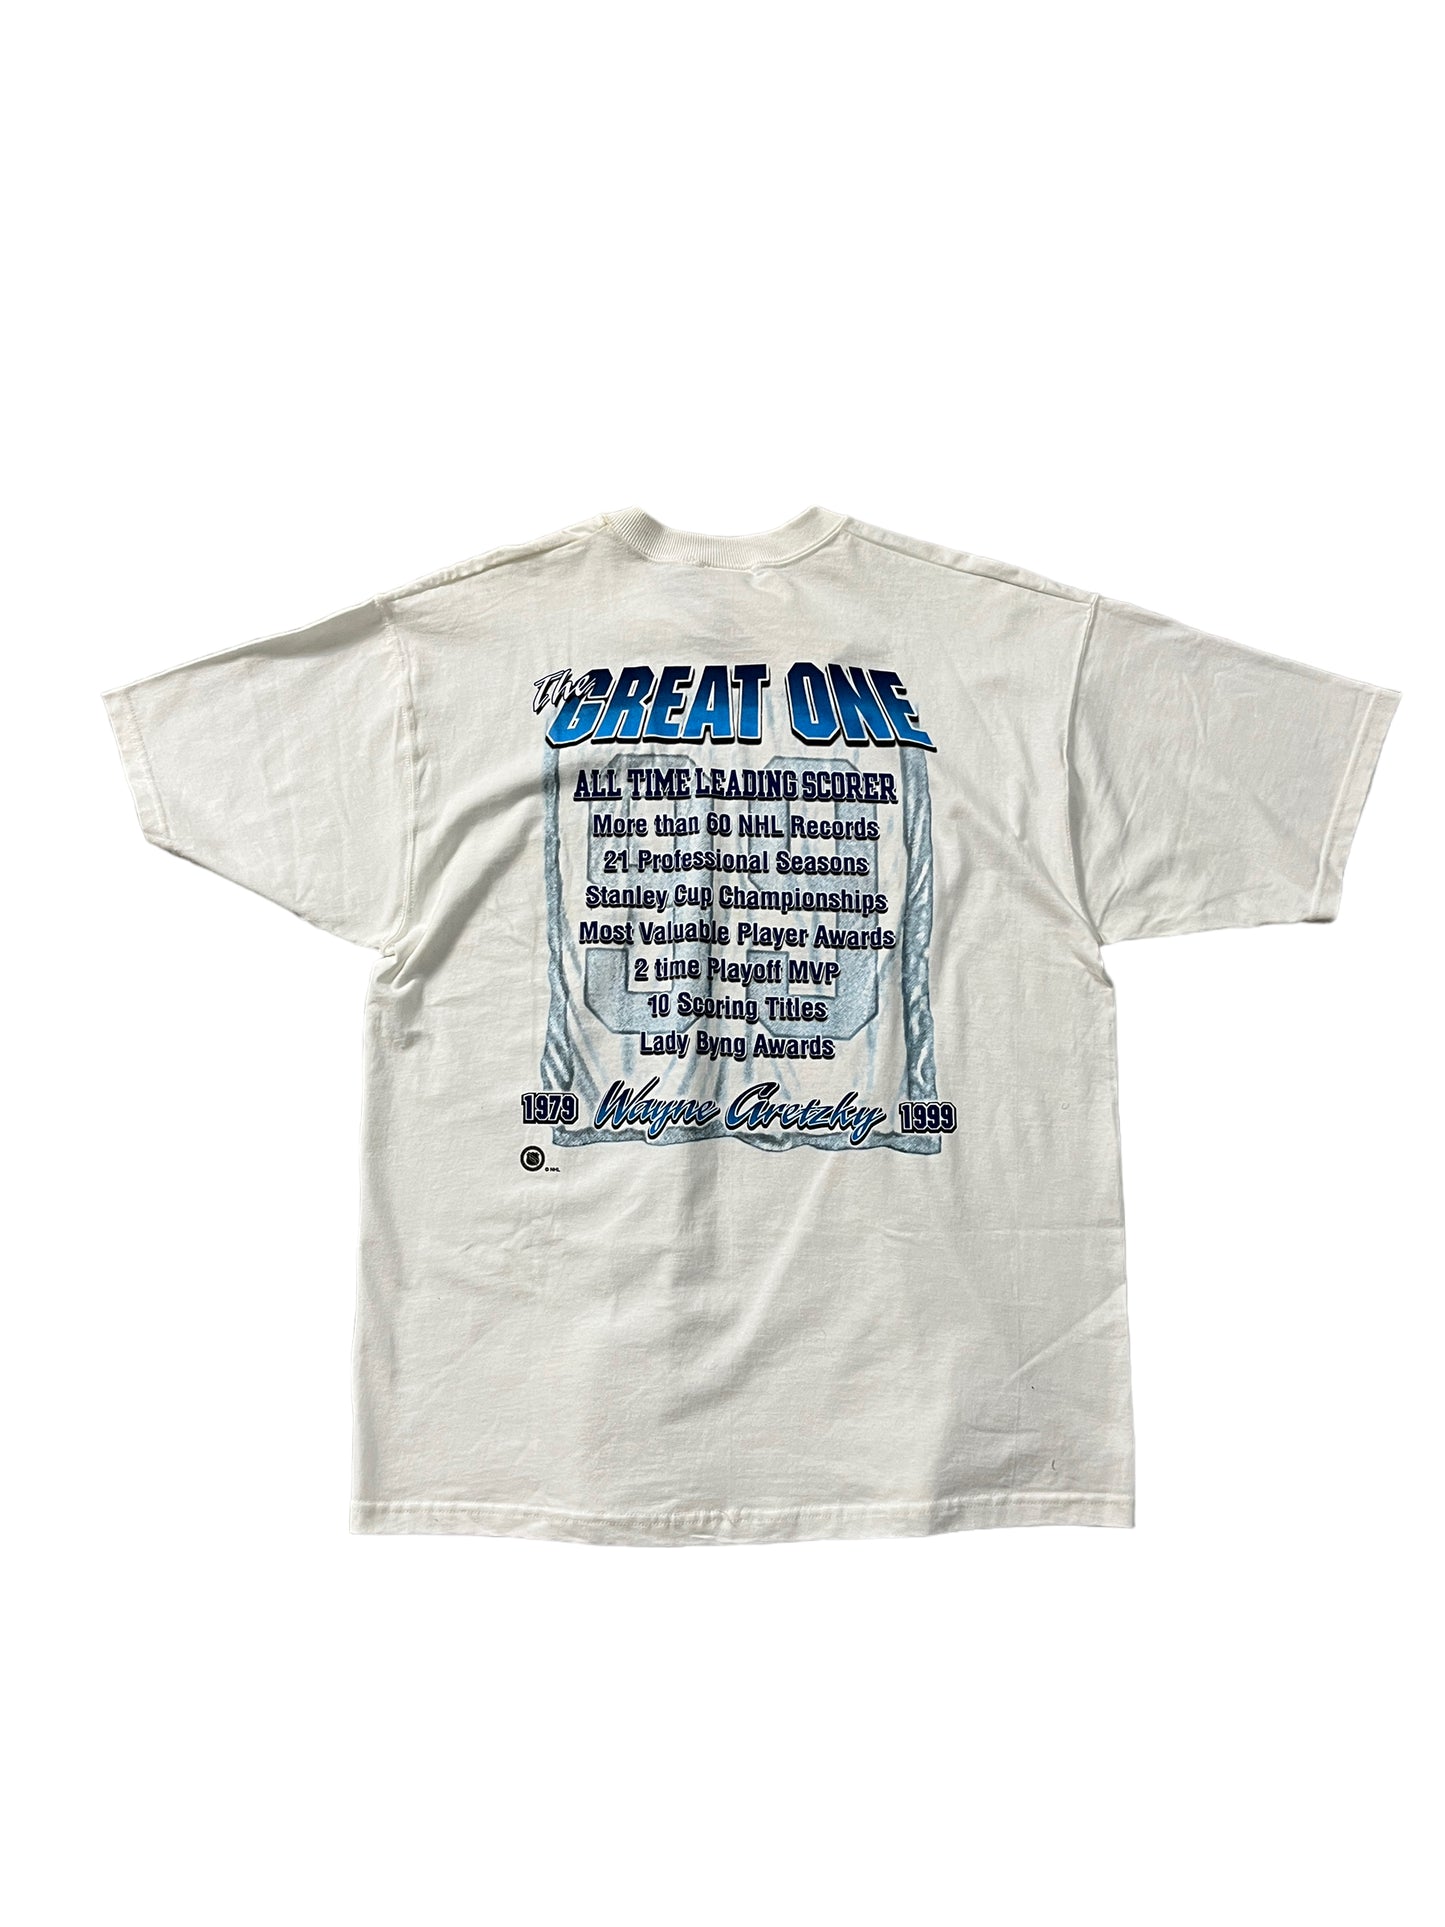 Vintage NHL Pro Player Wayne Gretzky "The Great One" Tee